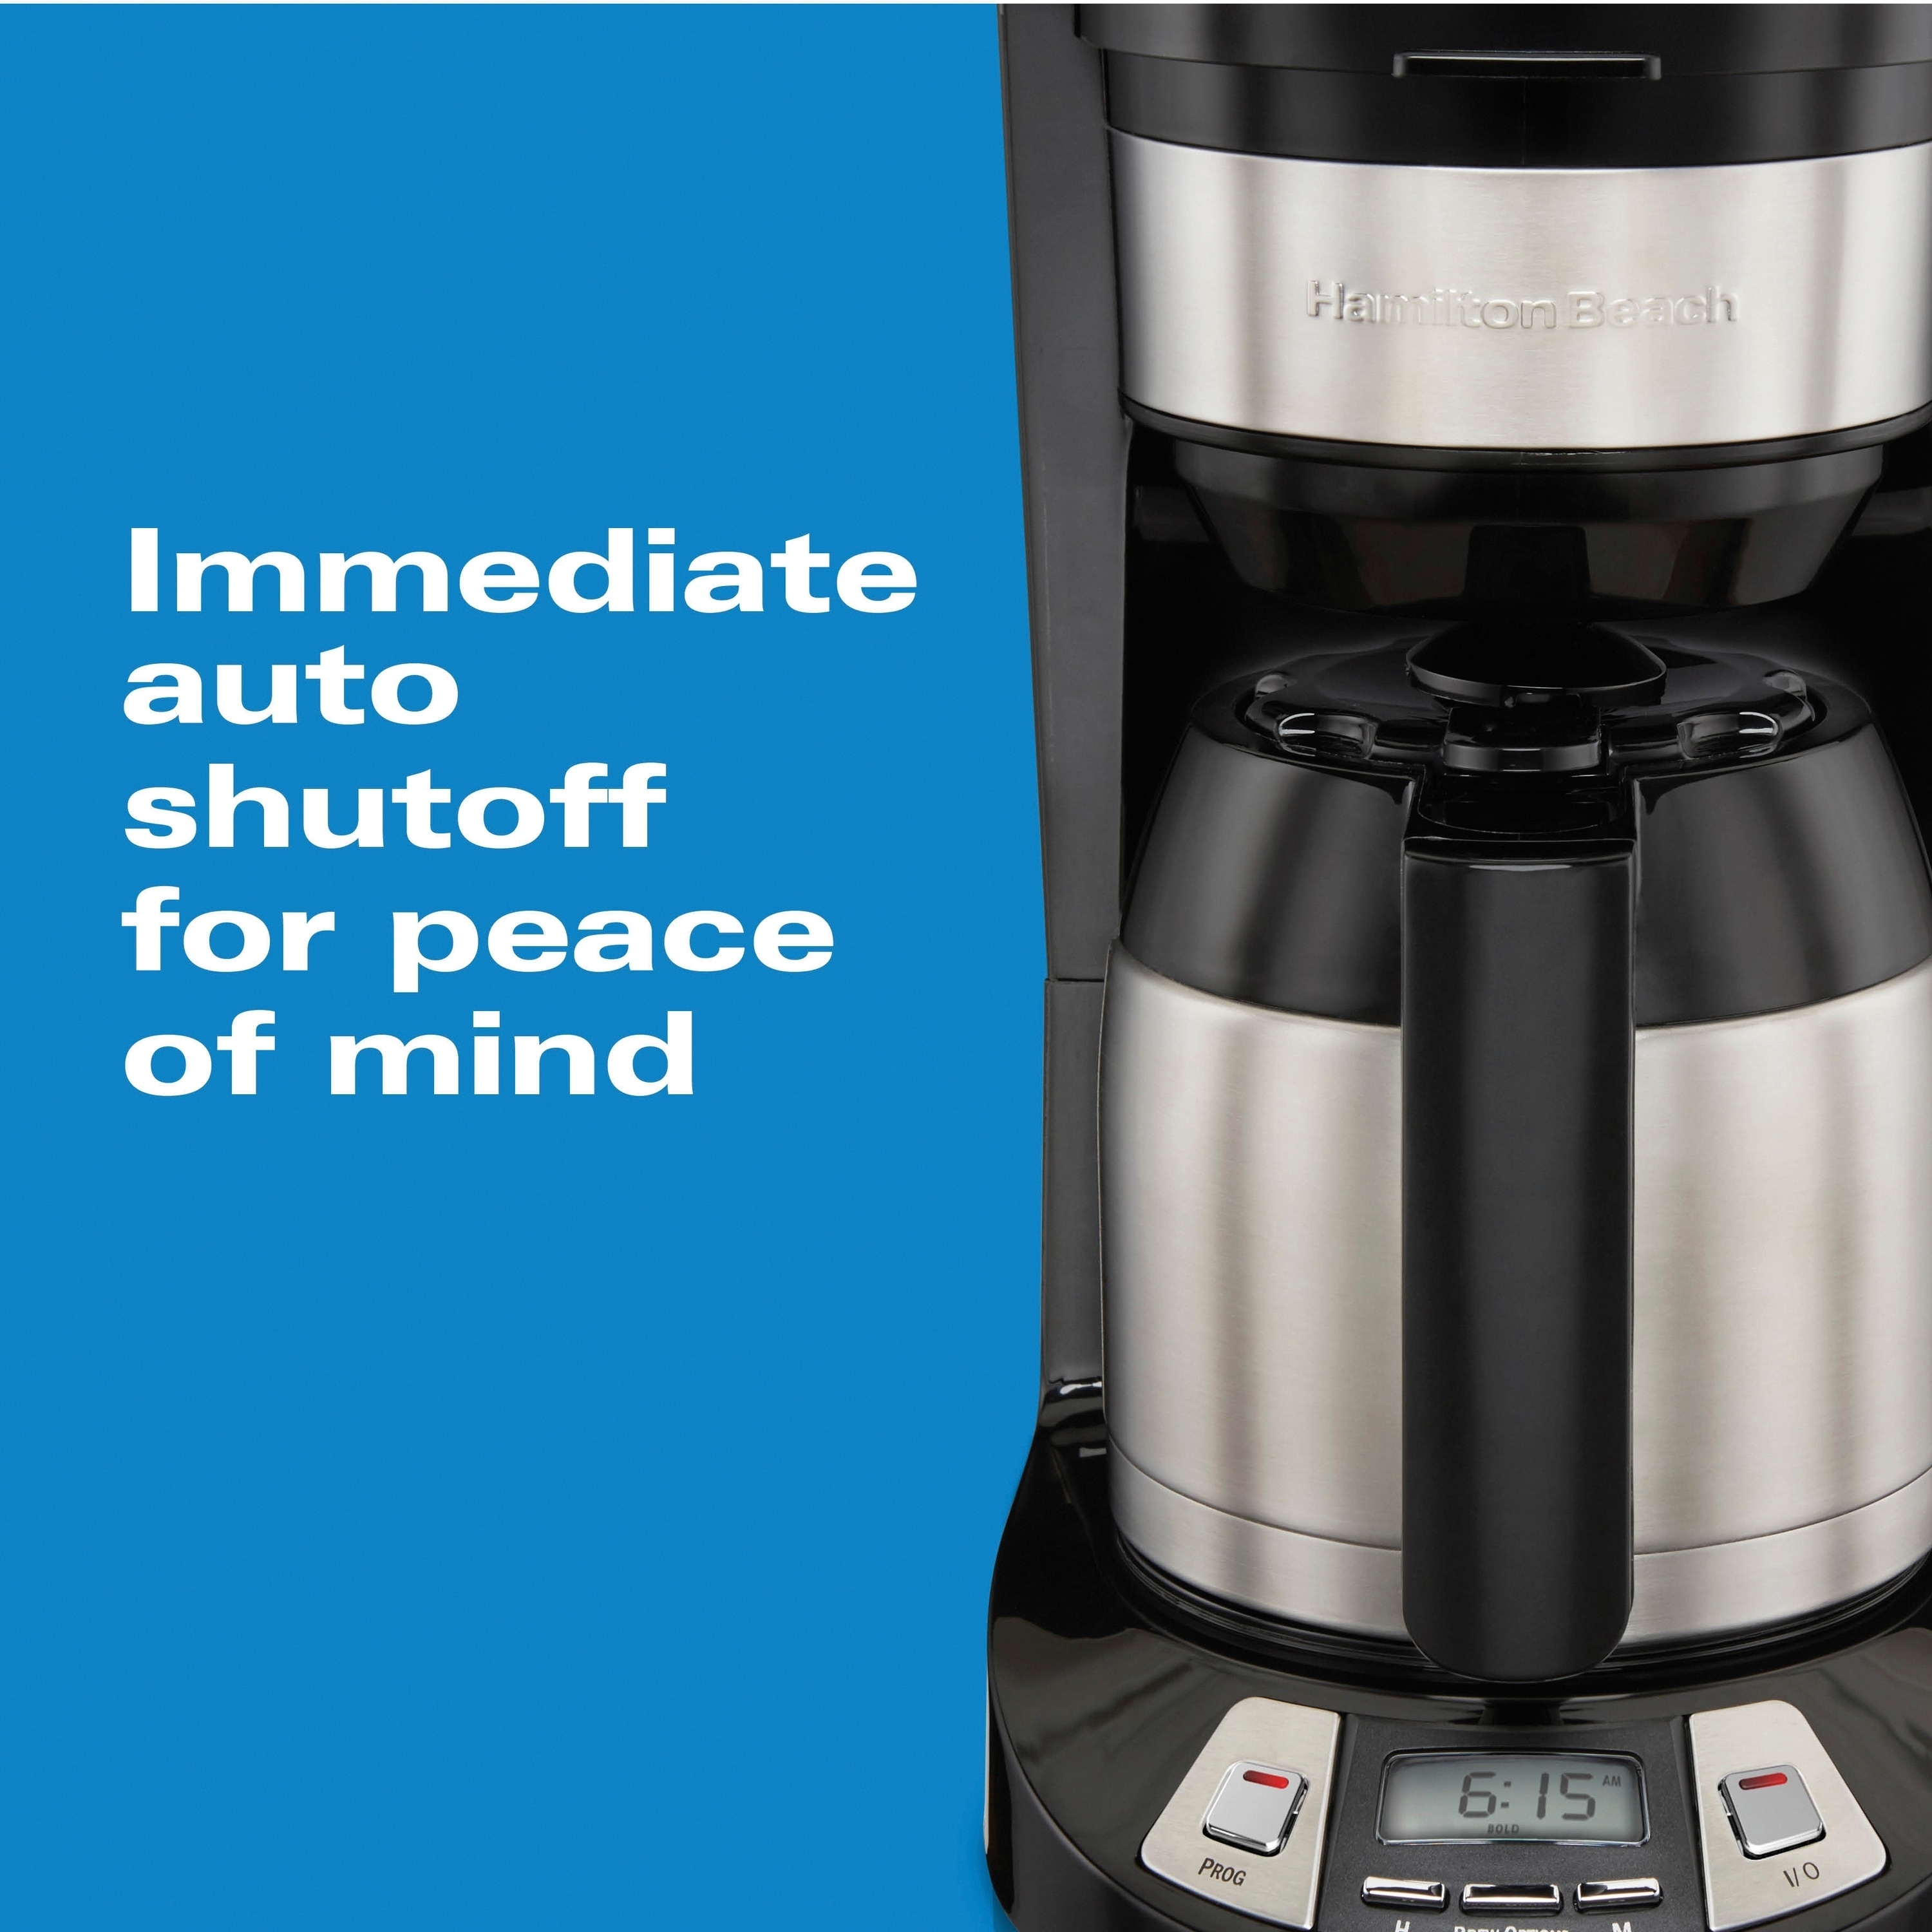 Hamilton Beach® 12 Cup Programmable Coffee Maker Glass Carafe & Reviews